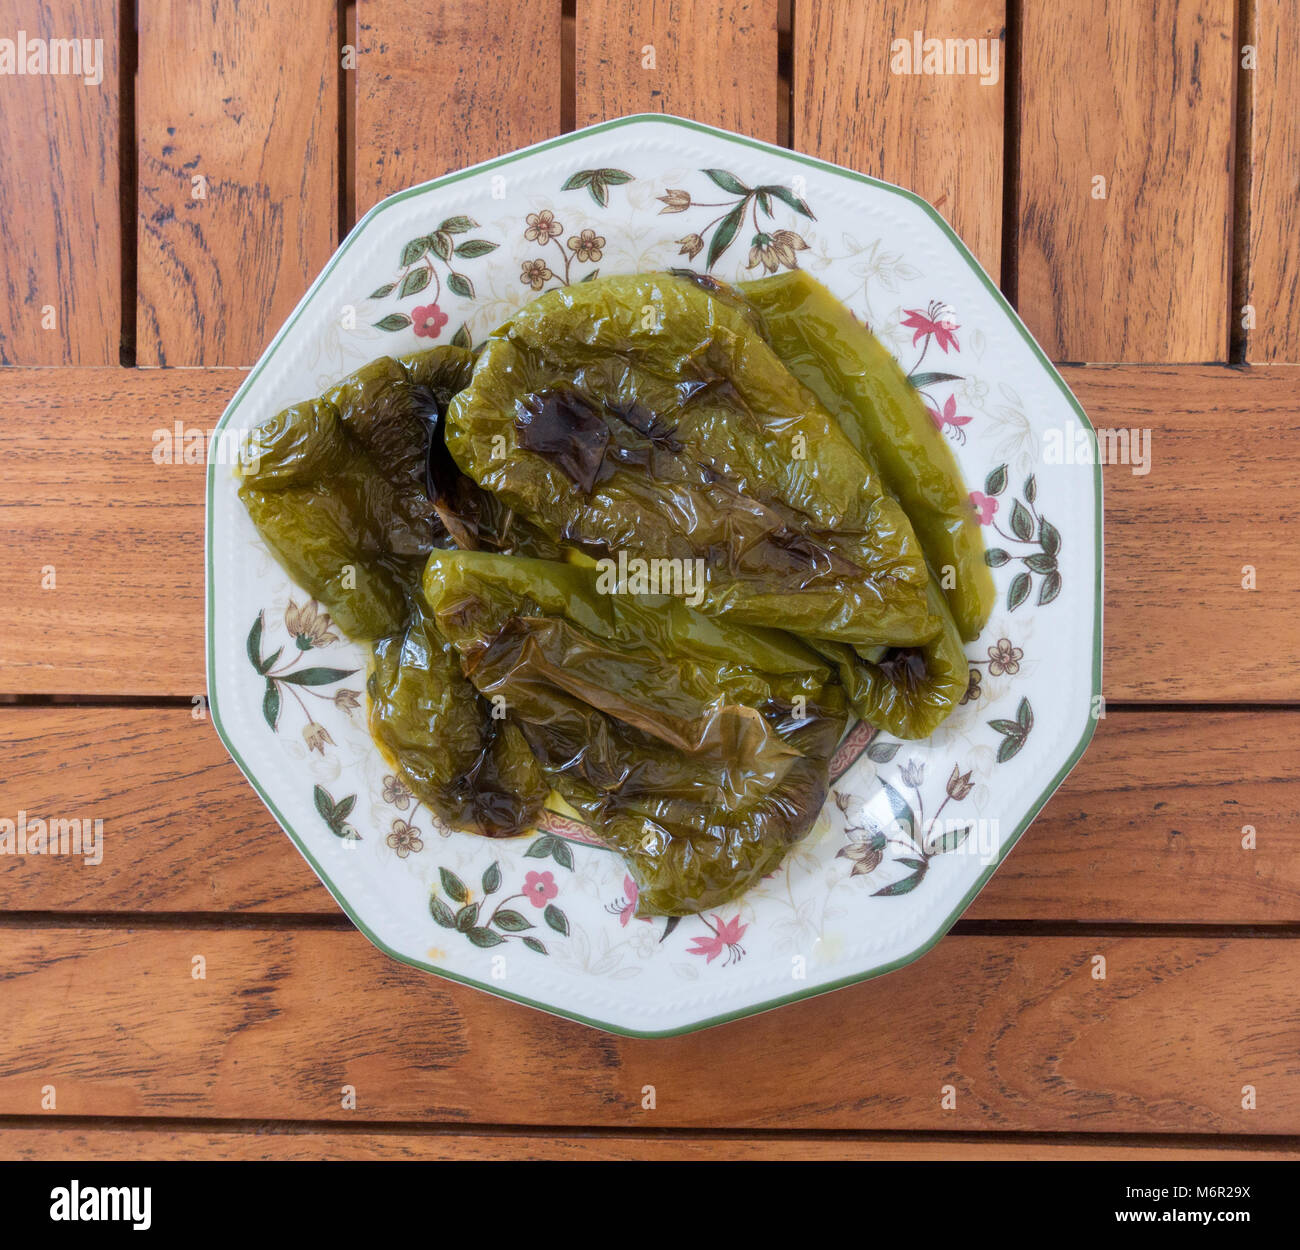 Roasted green peppers Stock Photo